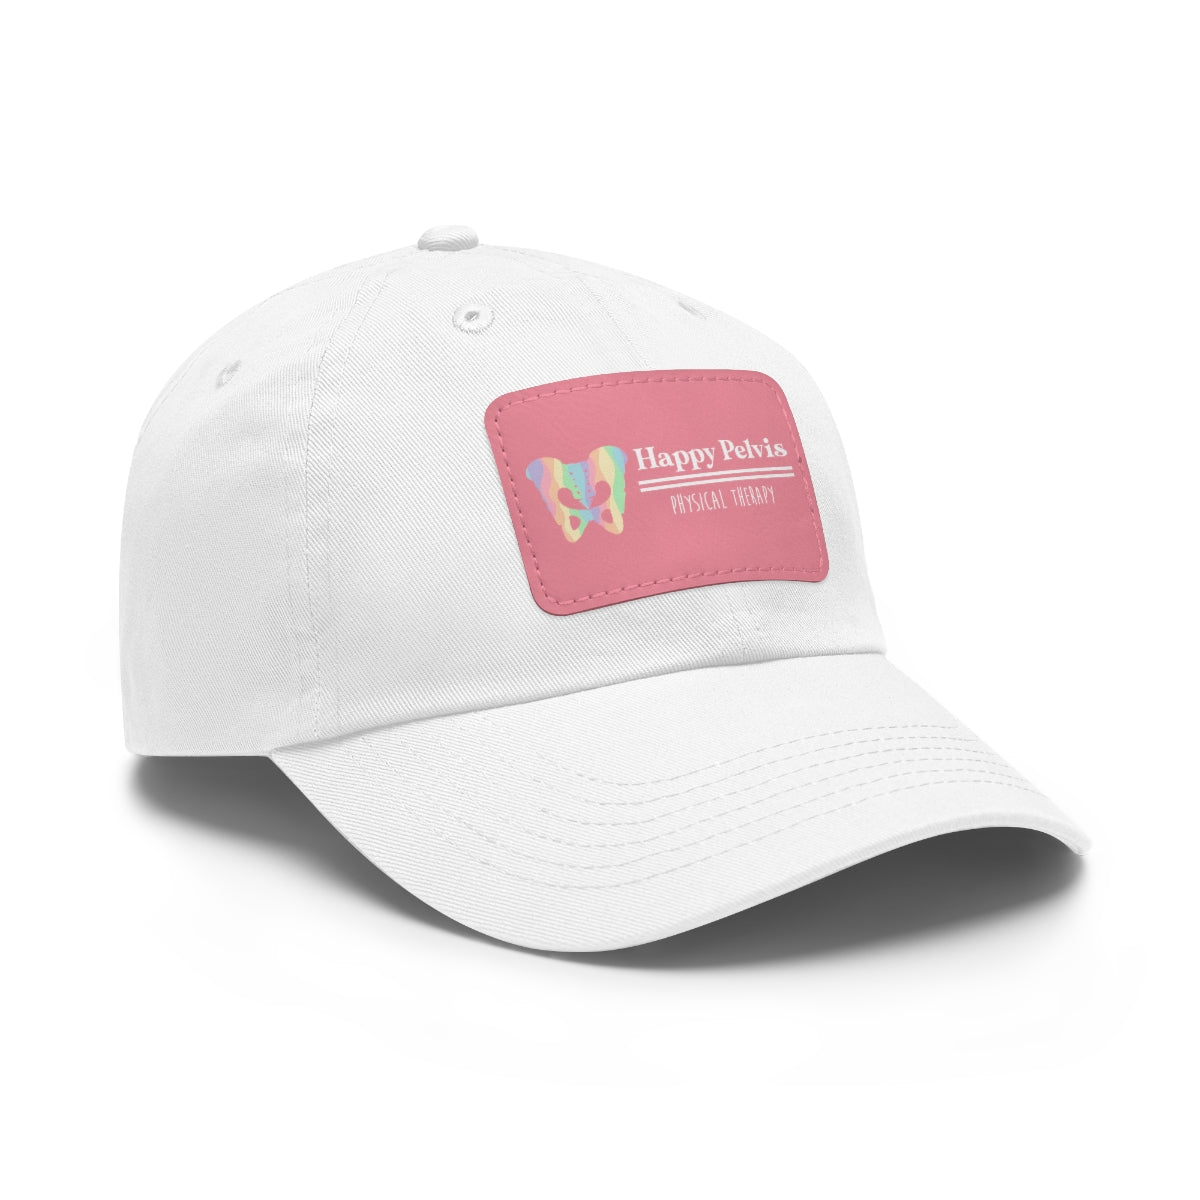 Happy Pelvis Physical Therapy Hat